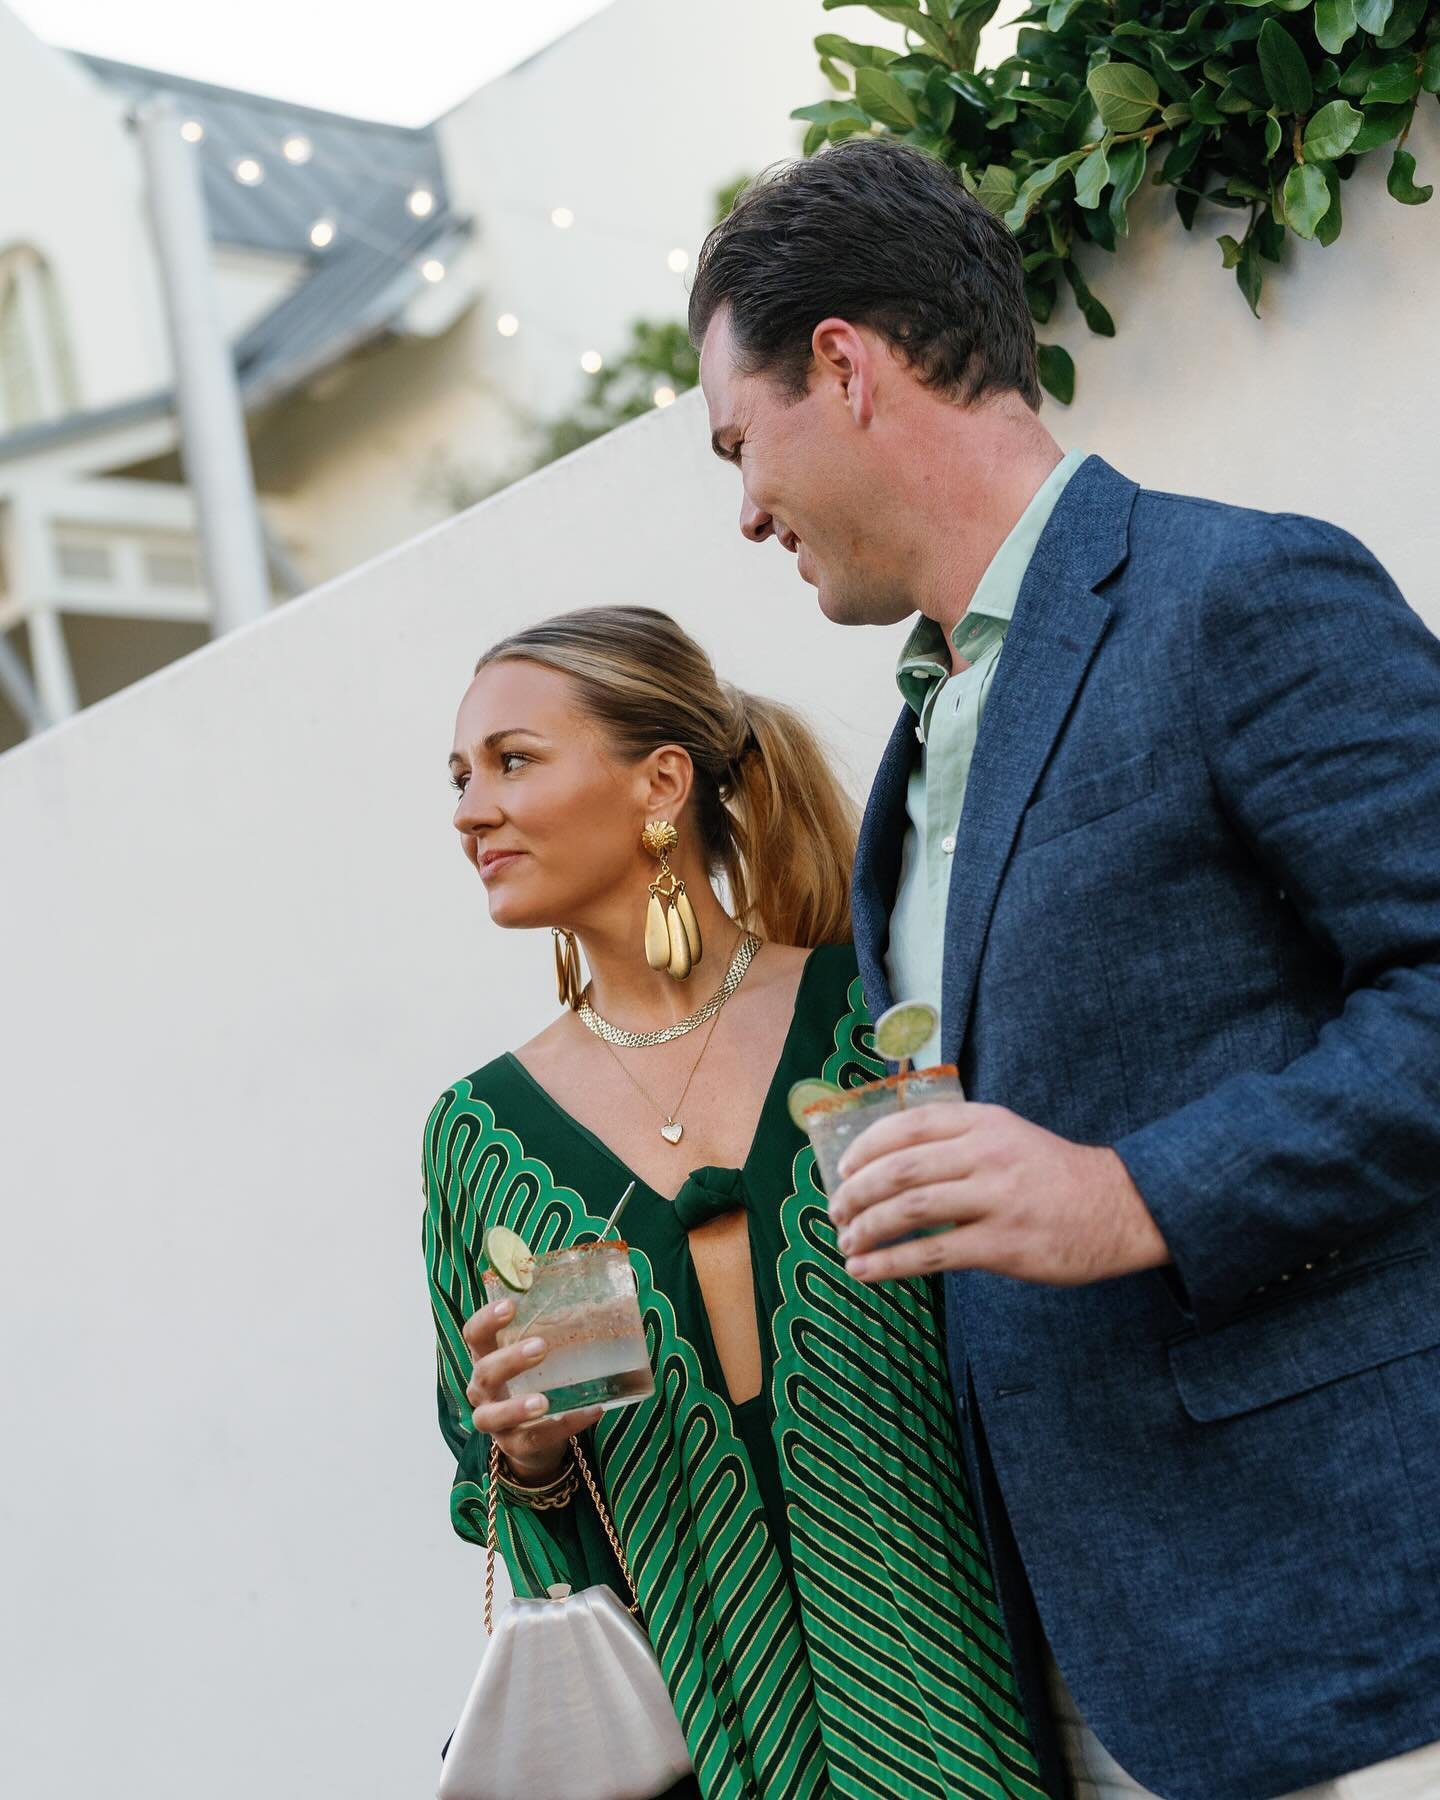 With vibrant style and fresh tans from a day in the sun, Alexa and Brooks welcomed their guests to Rosemary beach and set the tone for an incredible weekend full of color, cheers, and twists of lime!

Planning &amp; Design: @JessicaAshleyEvents | Reh